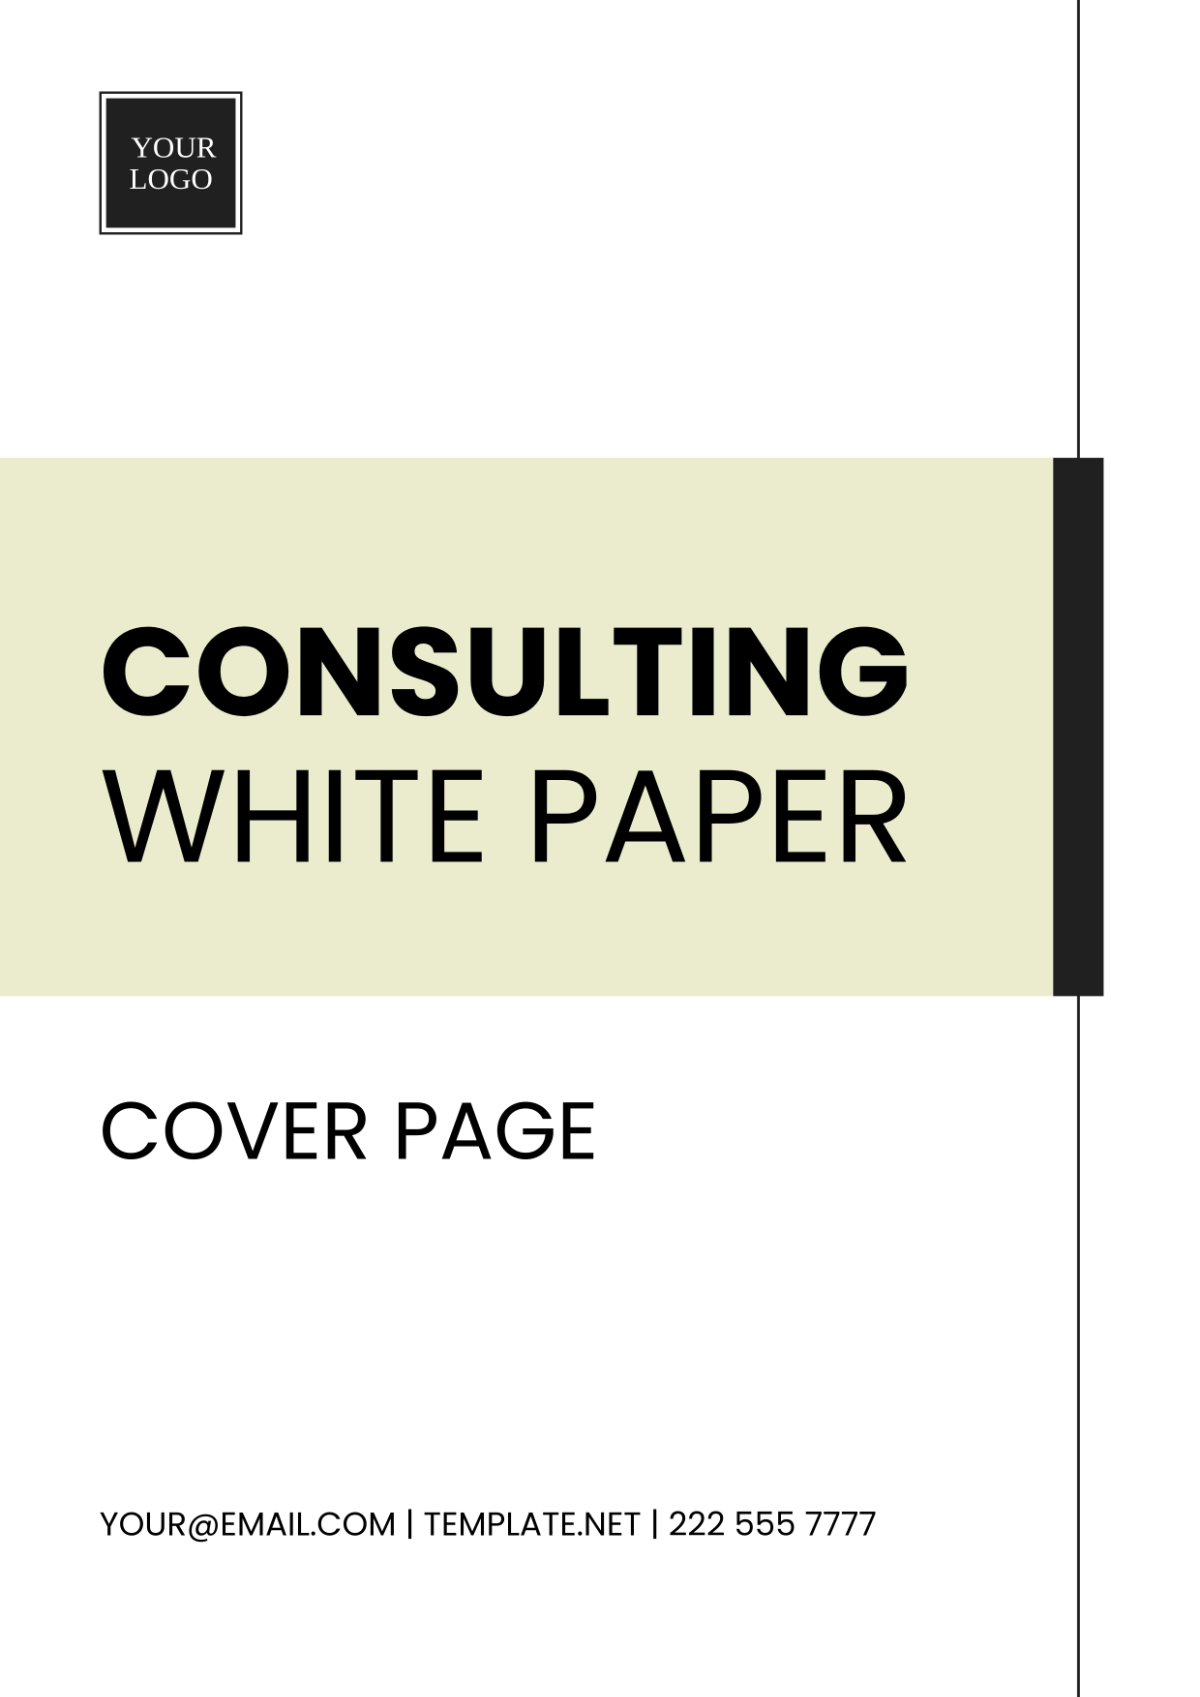 Consulting White Paper Cover Page